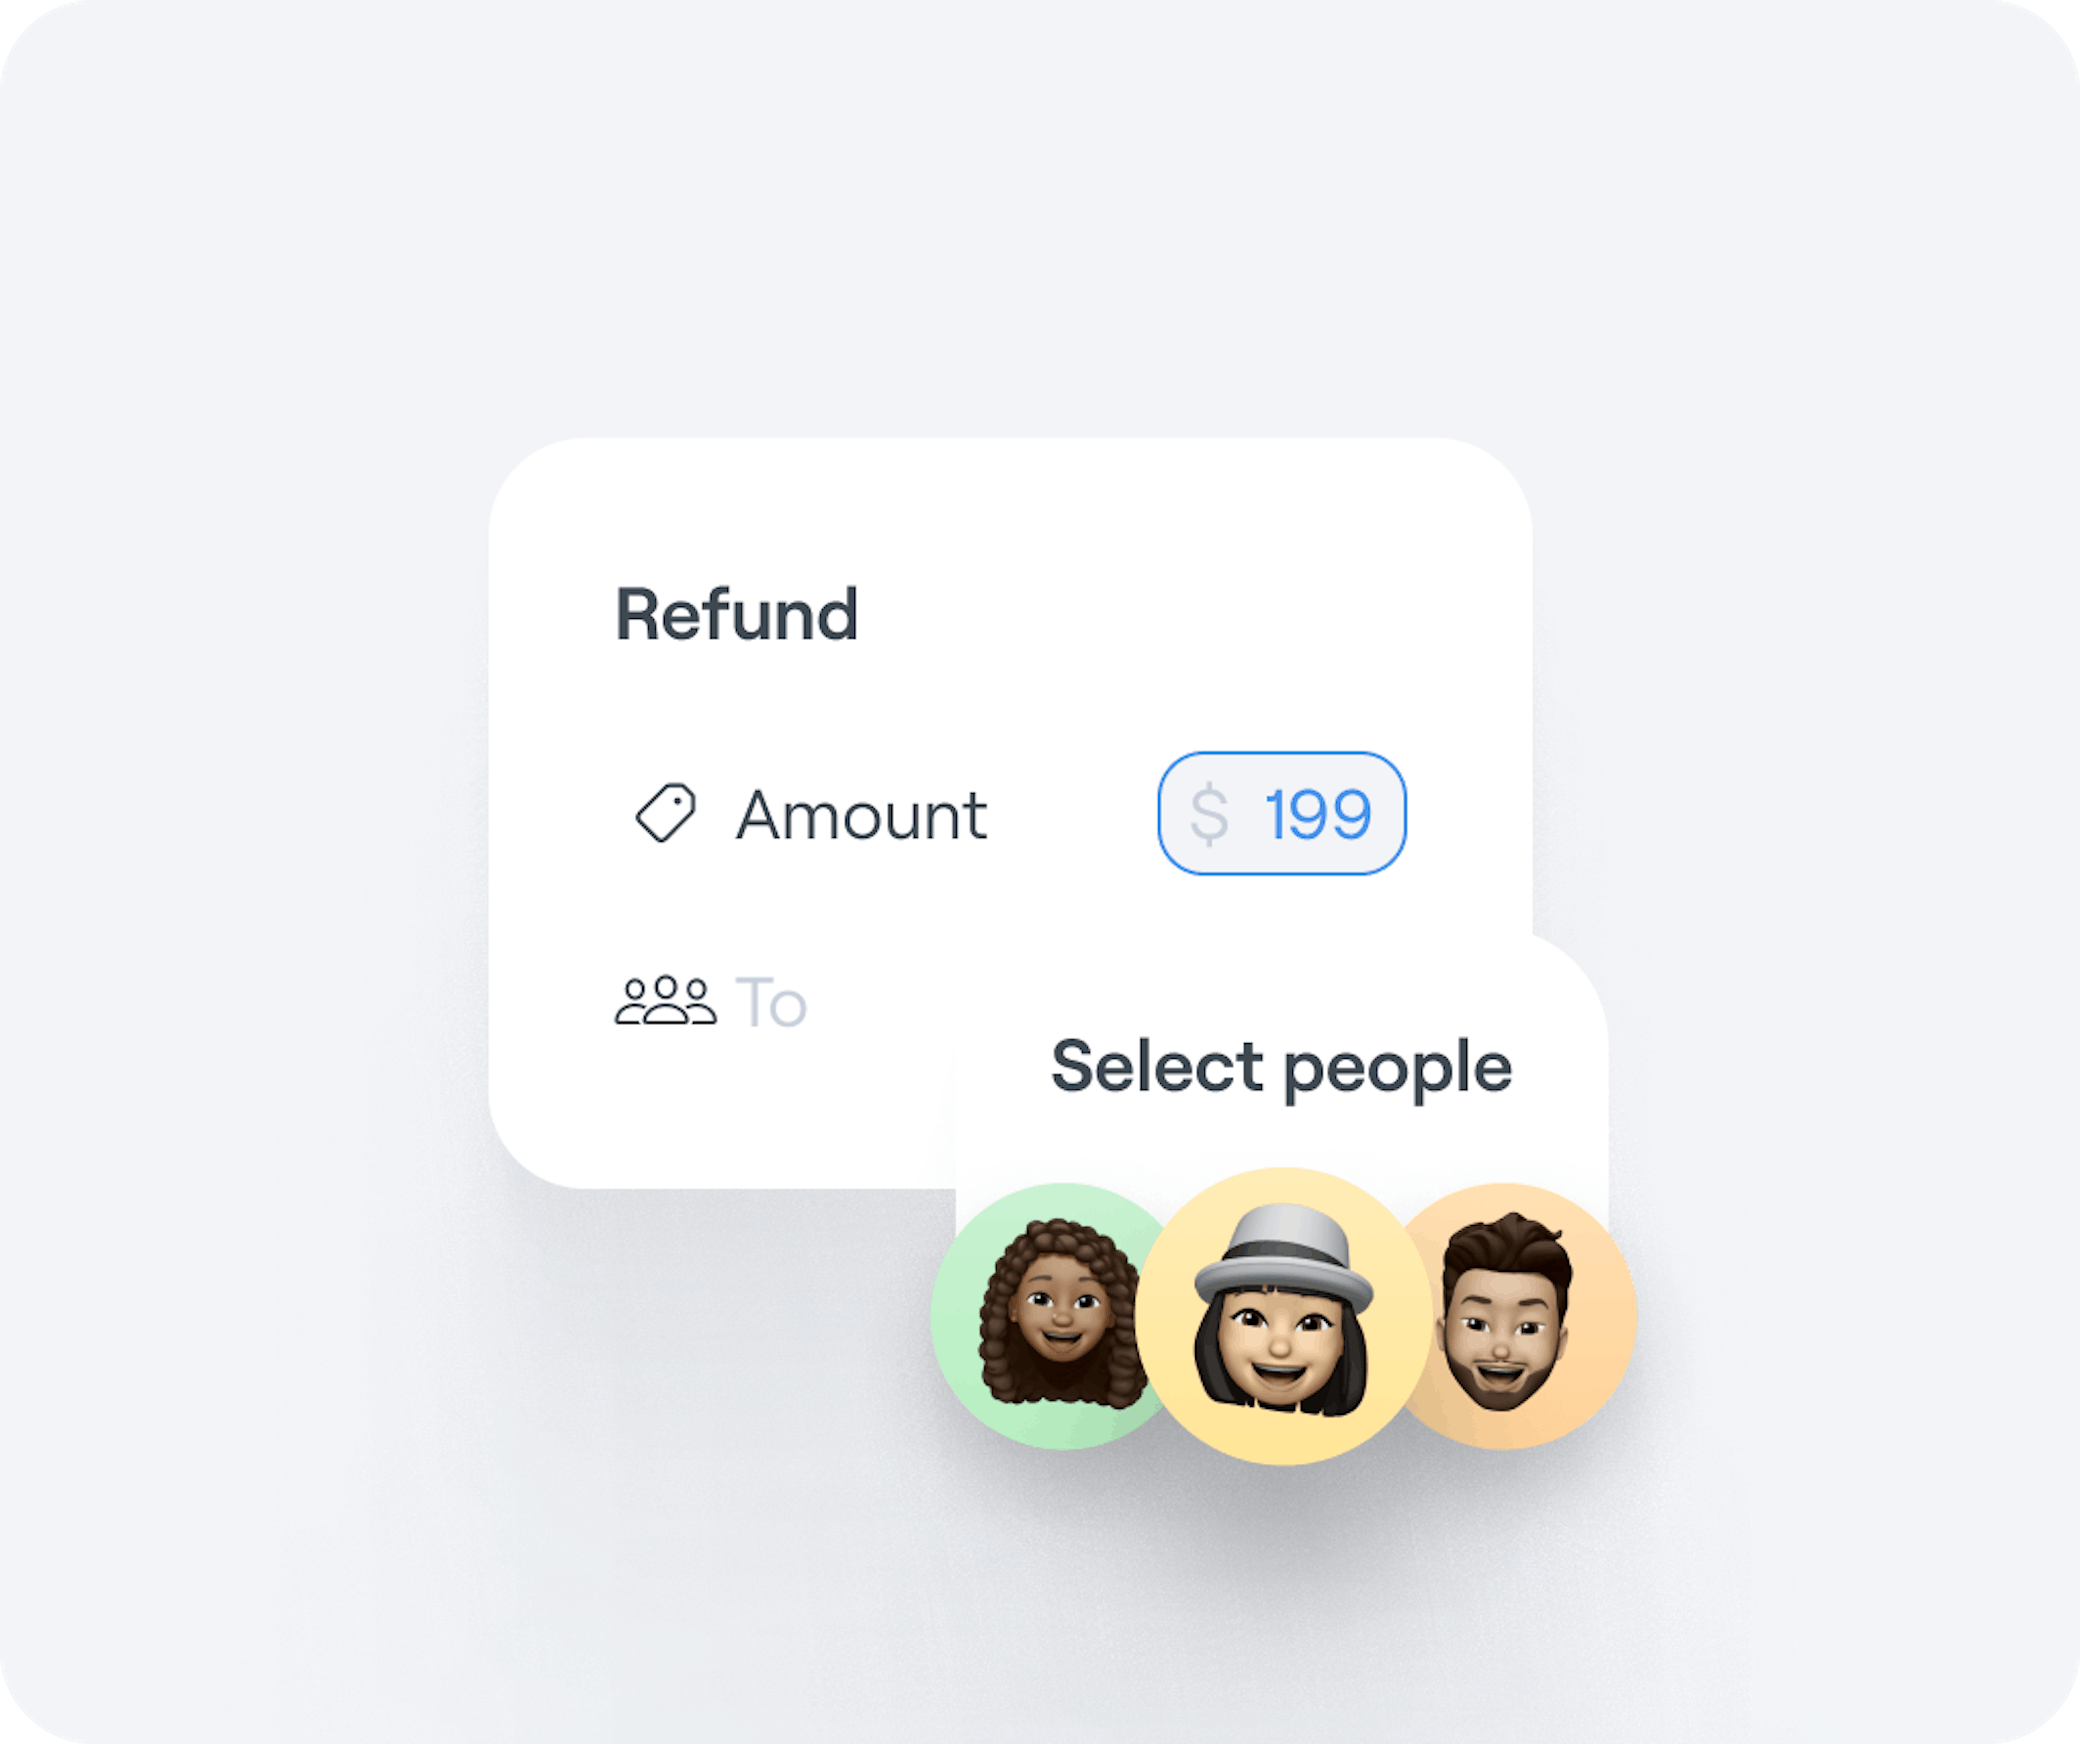 Interface graphic of an Abler refund page with selectable icons of users who would receive one